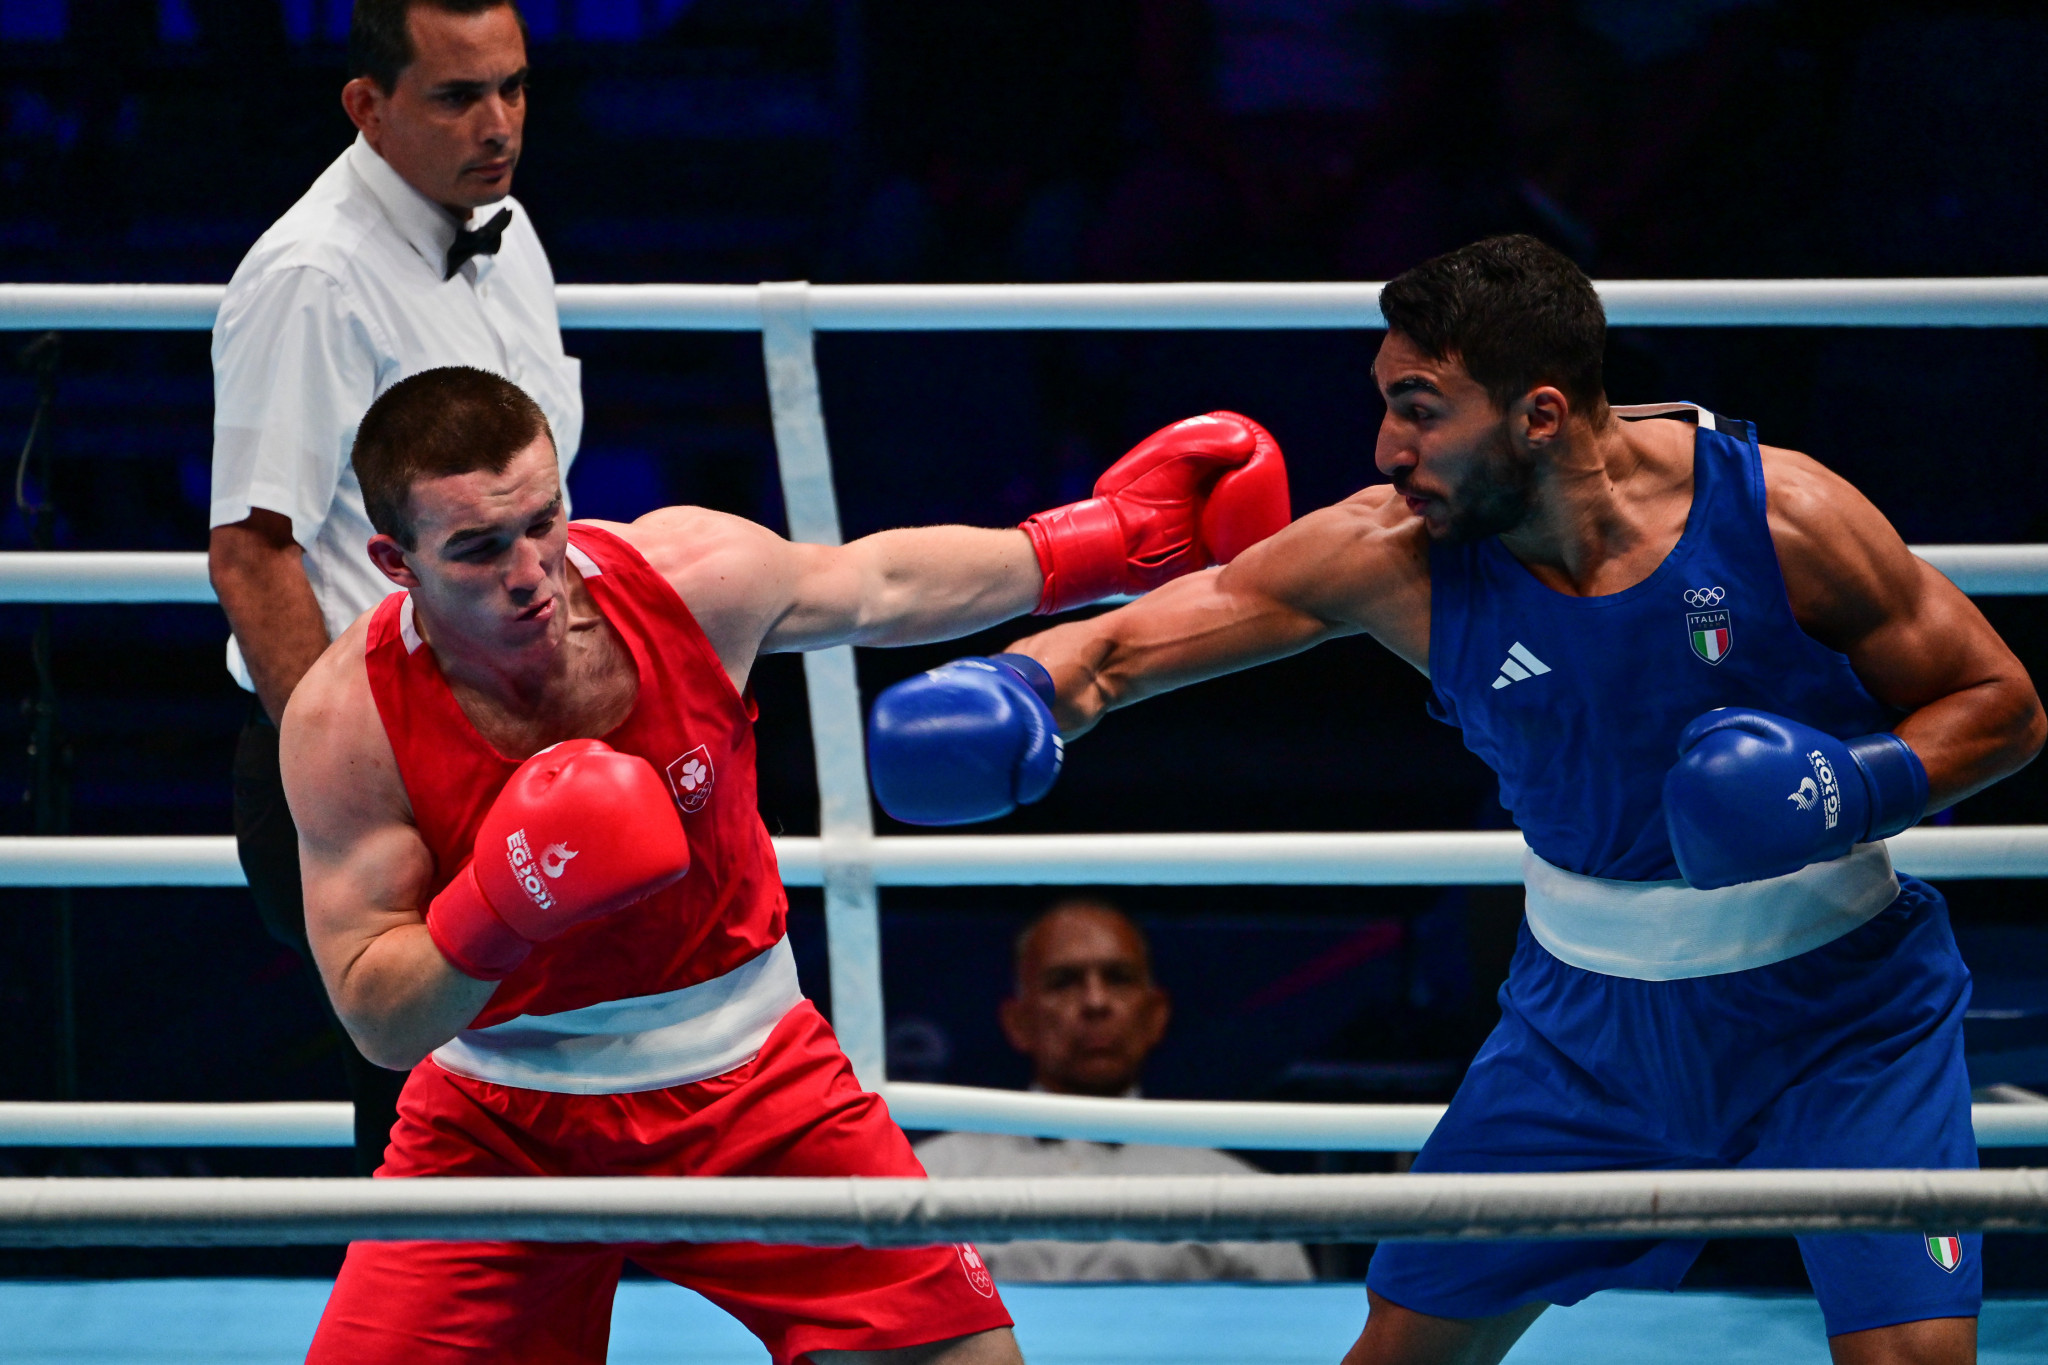 Aziz Abbes Mouhiidine of Italy, right, won the men's under-92kg boxing title at the European Games against Ireland's Jack Marley, left ©Kraków-Malopolska 2023